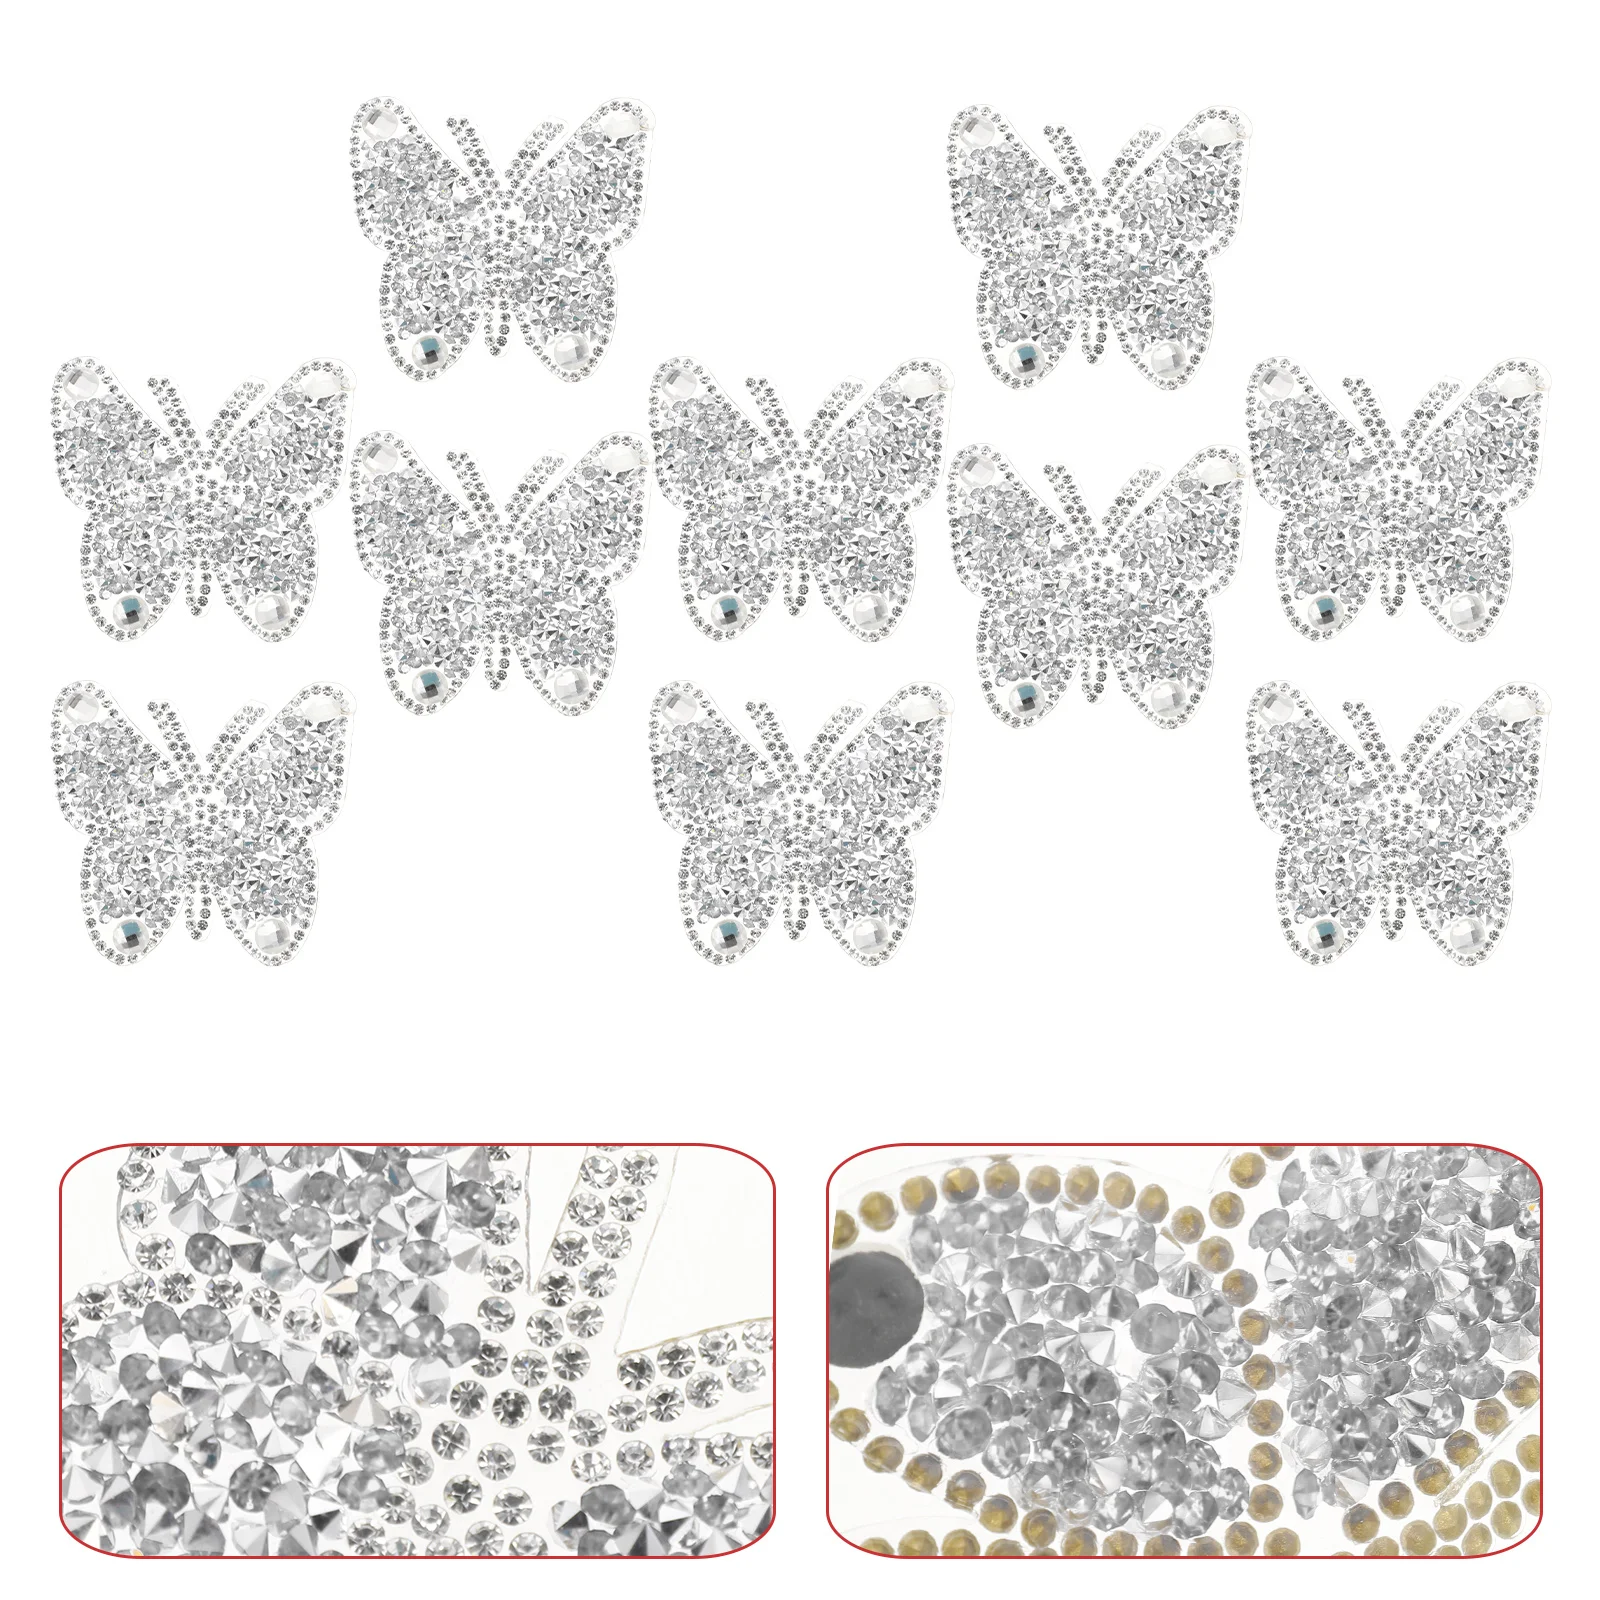 

10 Pcs Butterfly Hot Diamond Stickers Embroidered Shirt Repairing Patches Decor Home Crystal Garment Self-adhesive Back DIY